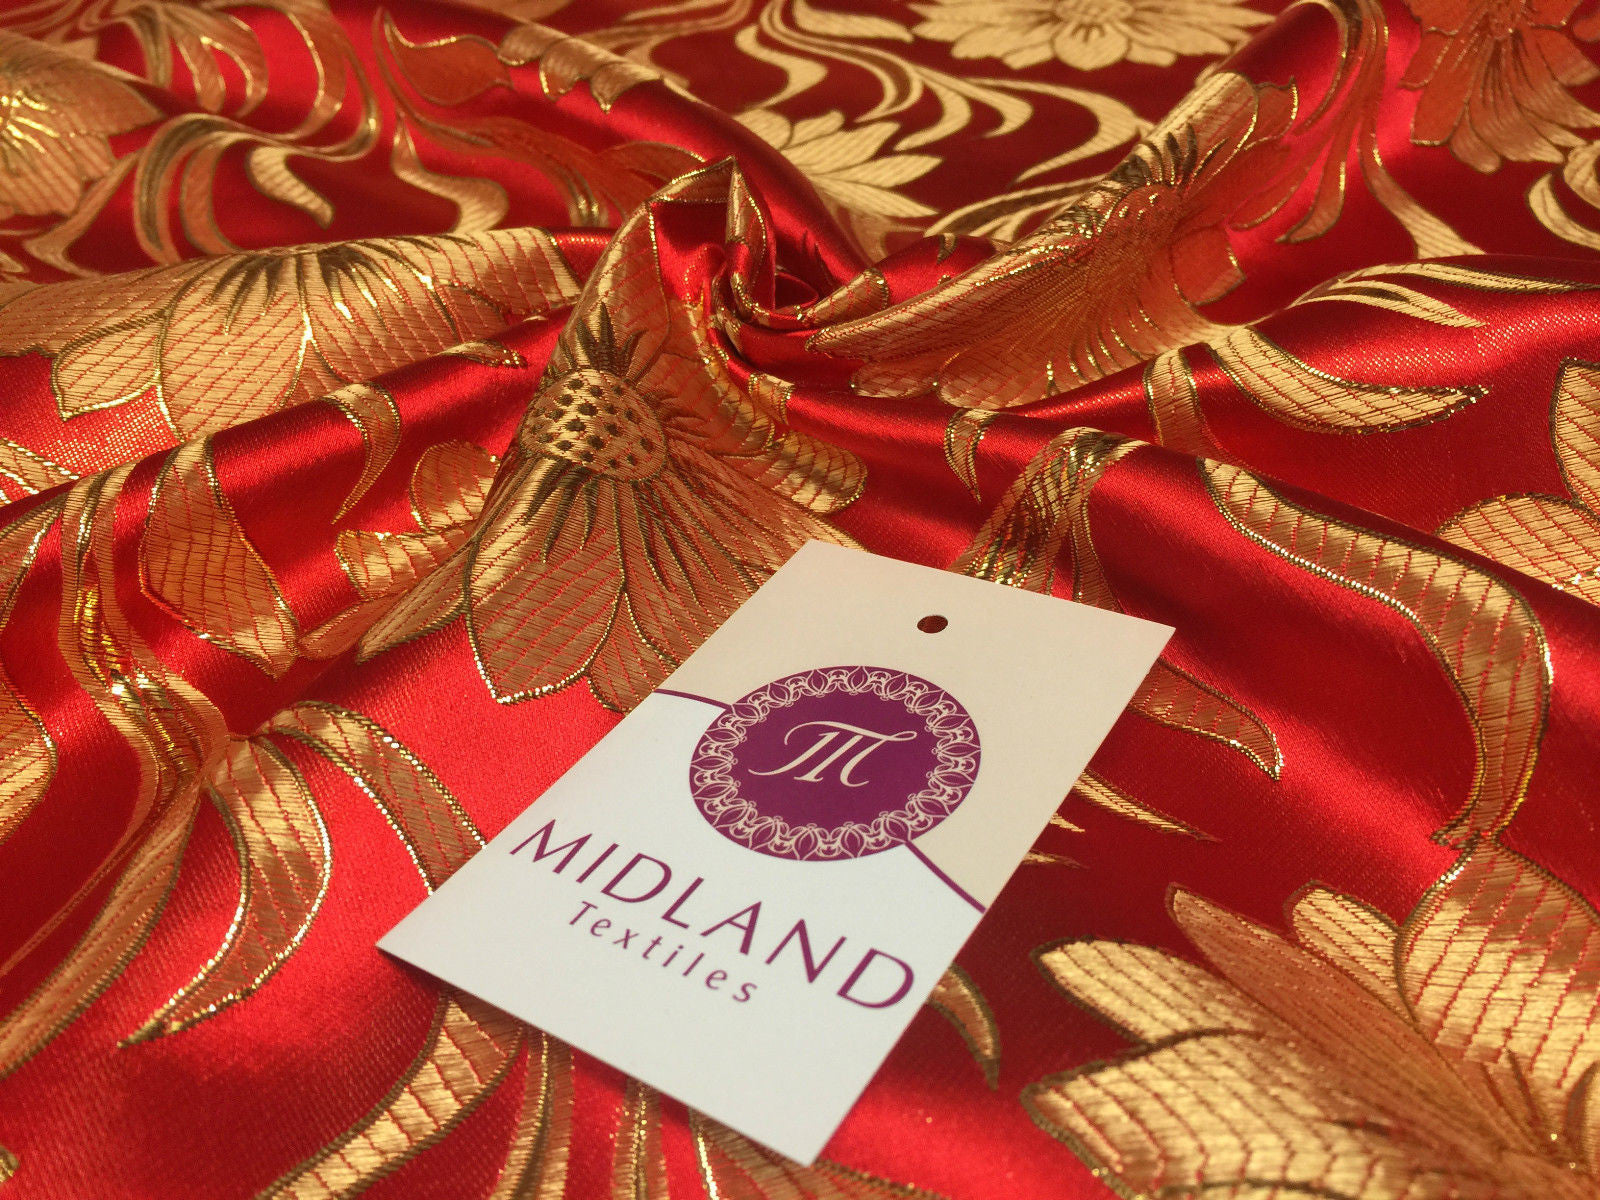 Red and gold floral Metallic jacquard brocade Fabric 58" Wide M380 Mtex - Midland Textiles & Fabric